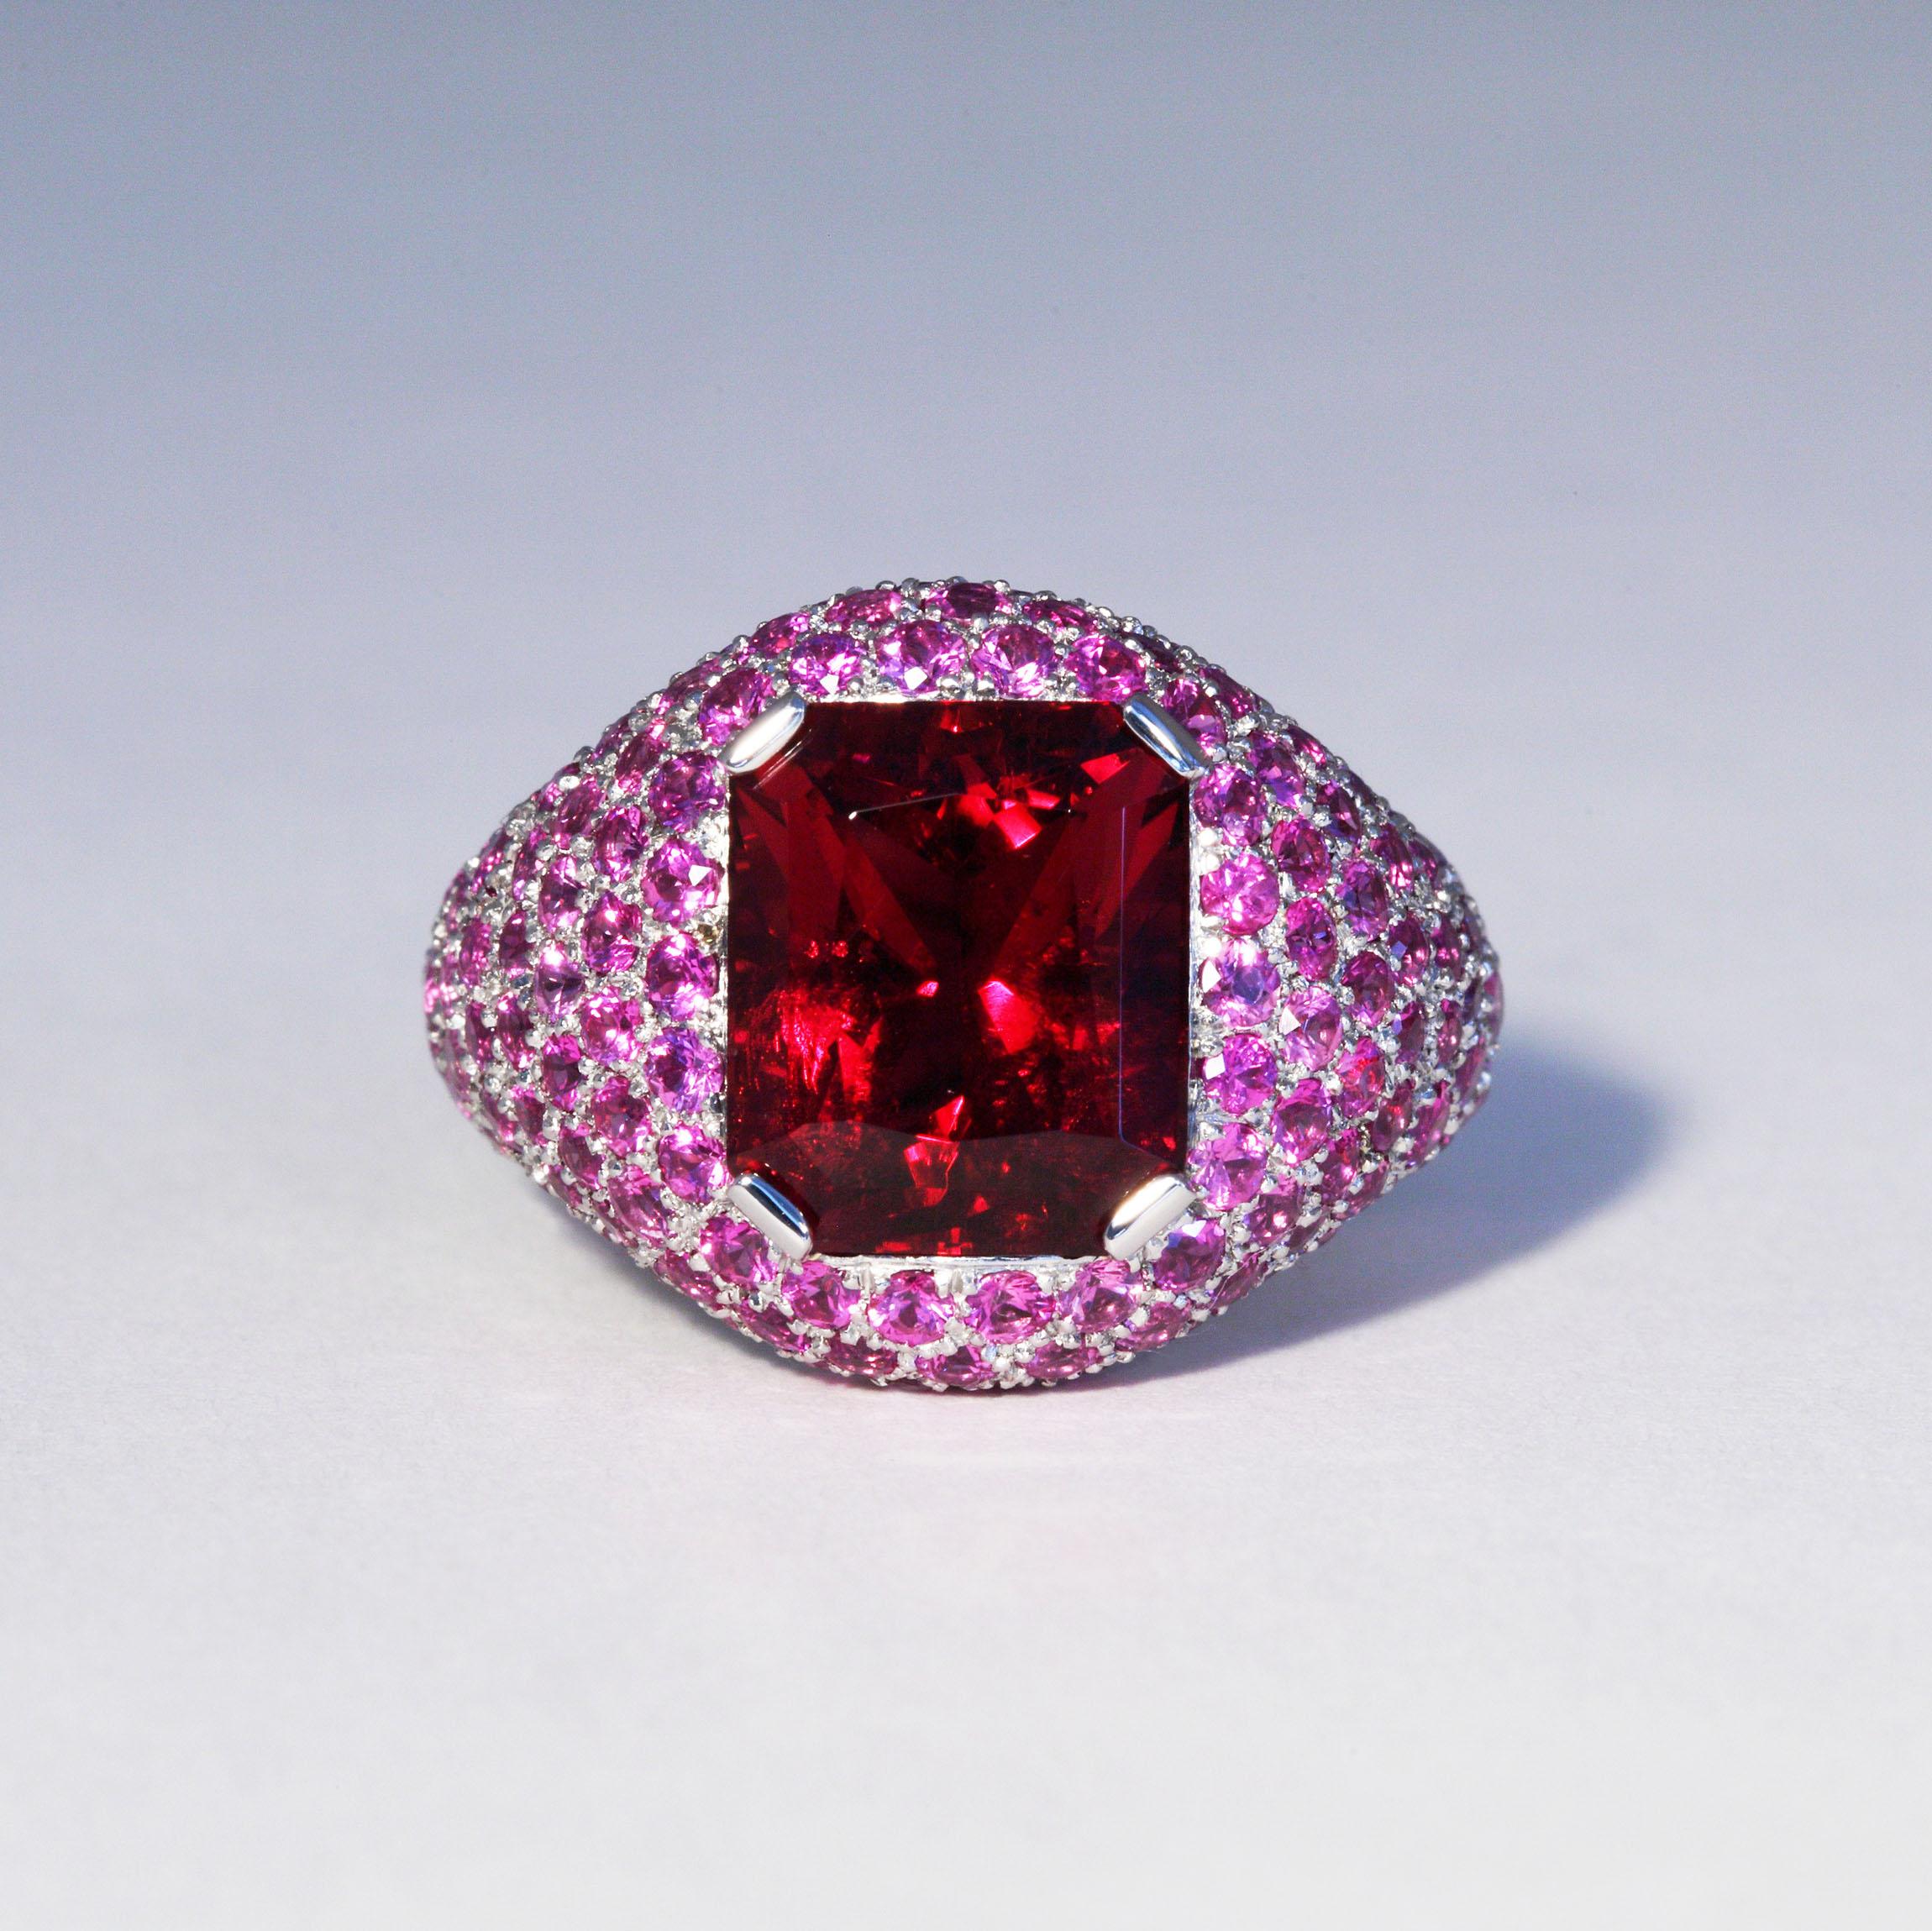 This fine octagonal Rubelite Tourmaline of 5.91 carats is set in a platinum ring with 4.14 carats pink Sapphires. An inner spring moves easily over the knuckle and holds the ring in place. It is designed and hand made in Zurich, Switzerland by